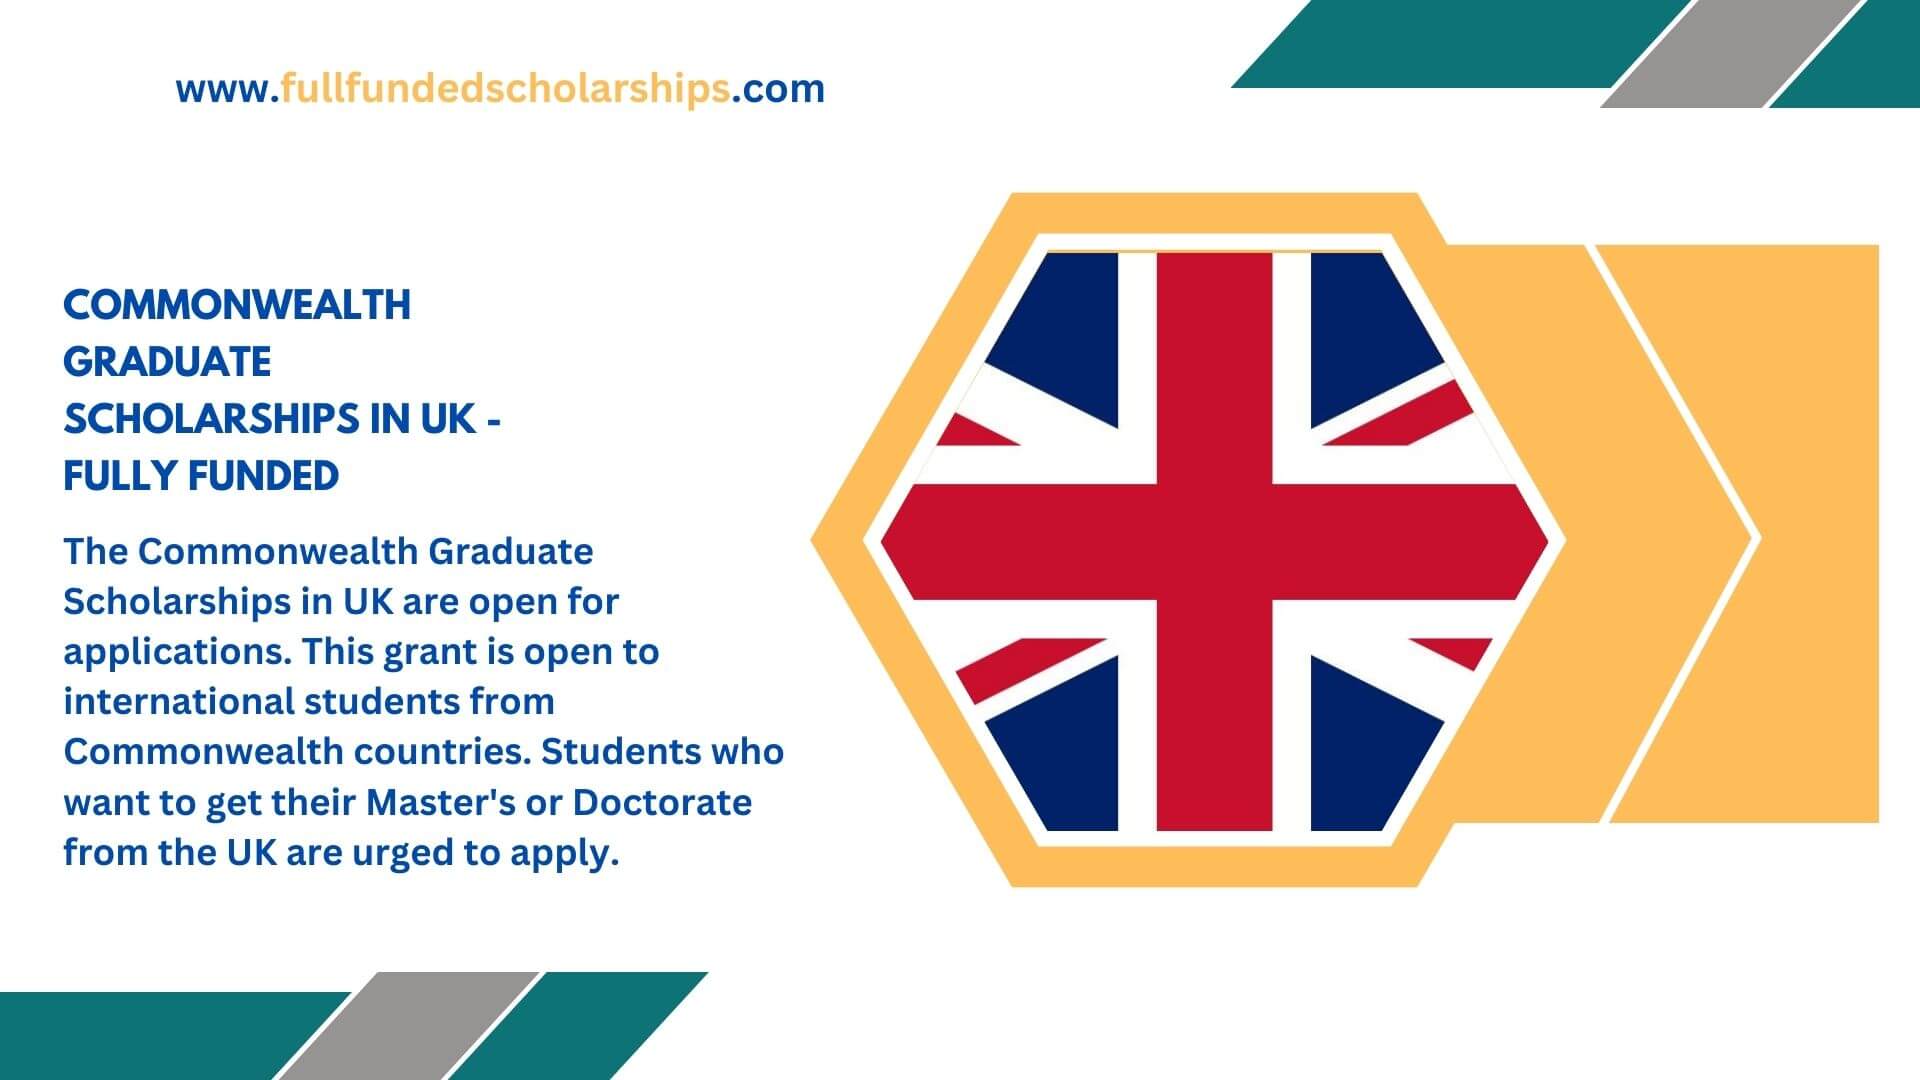 Commonwealth Graduate Scholarships in UK - Fully Funded